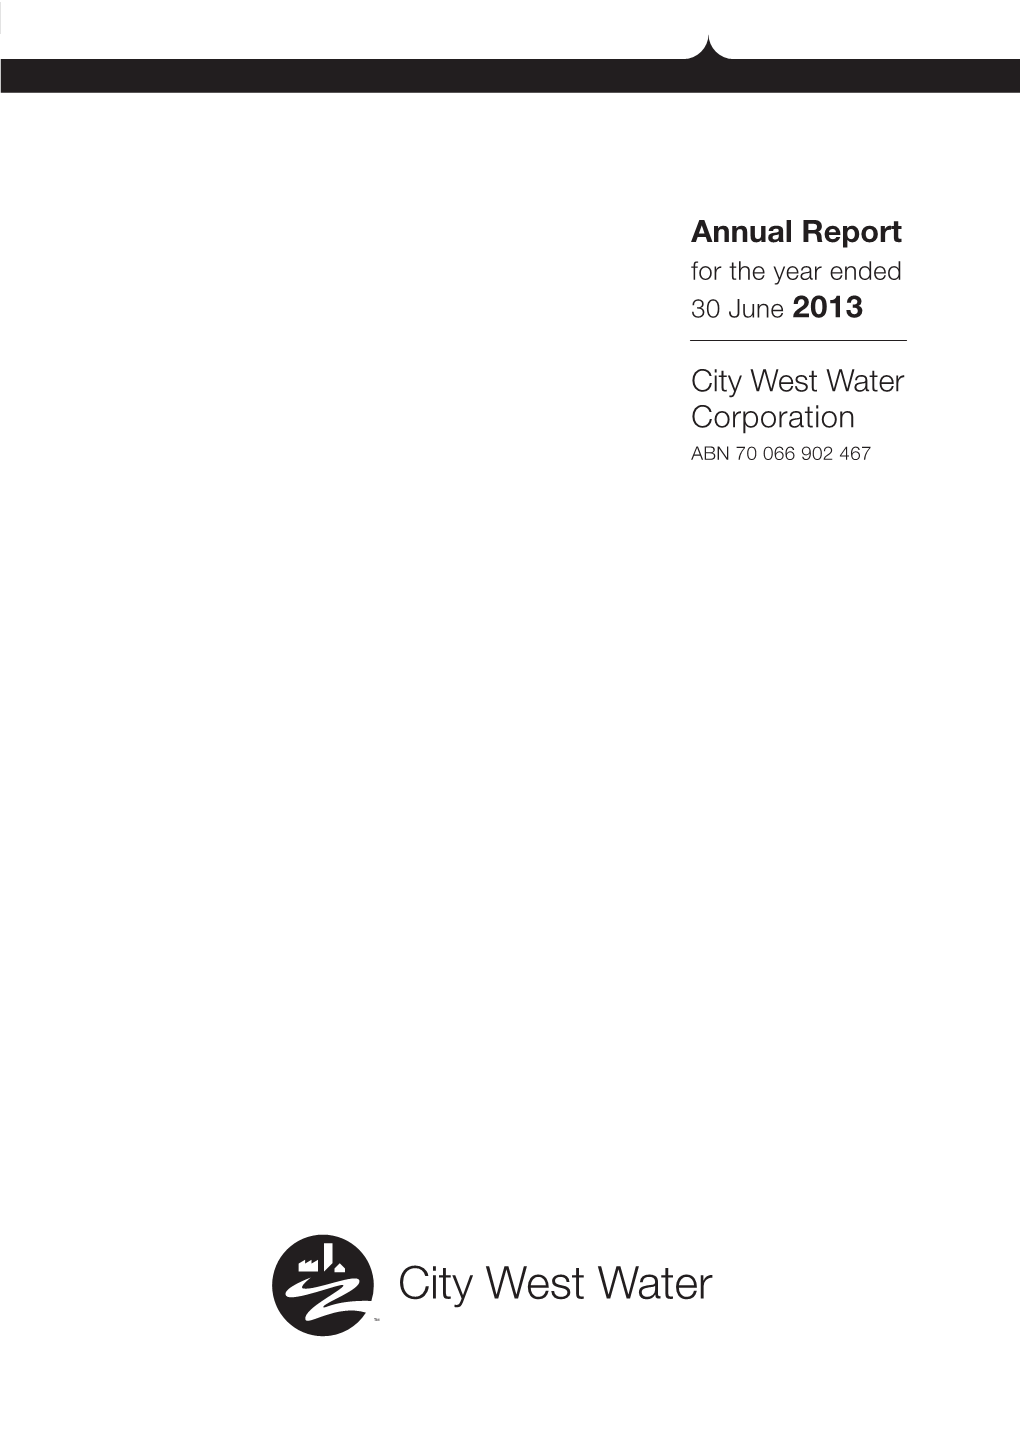 Annual Report City West Water Corporation